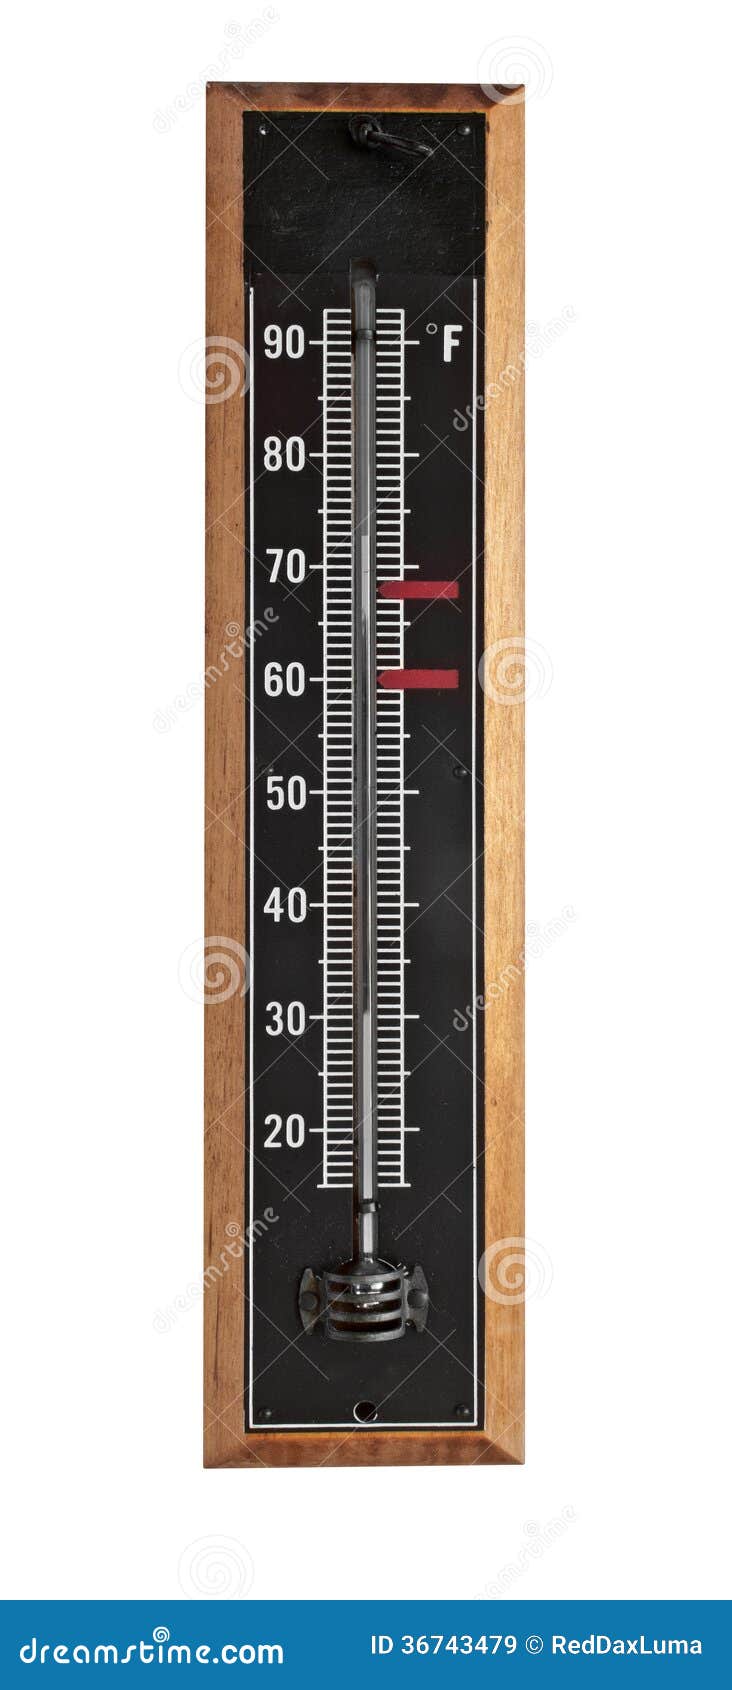 https://thumbs.dreamstime.com/z/vintage-thermometer-wall-mount-black-enamel-wood-indoor-isolated-white-36743479.jpg